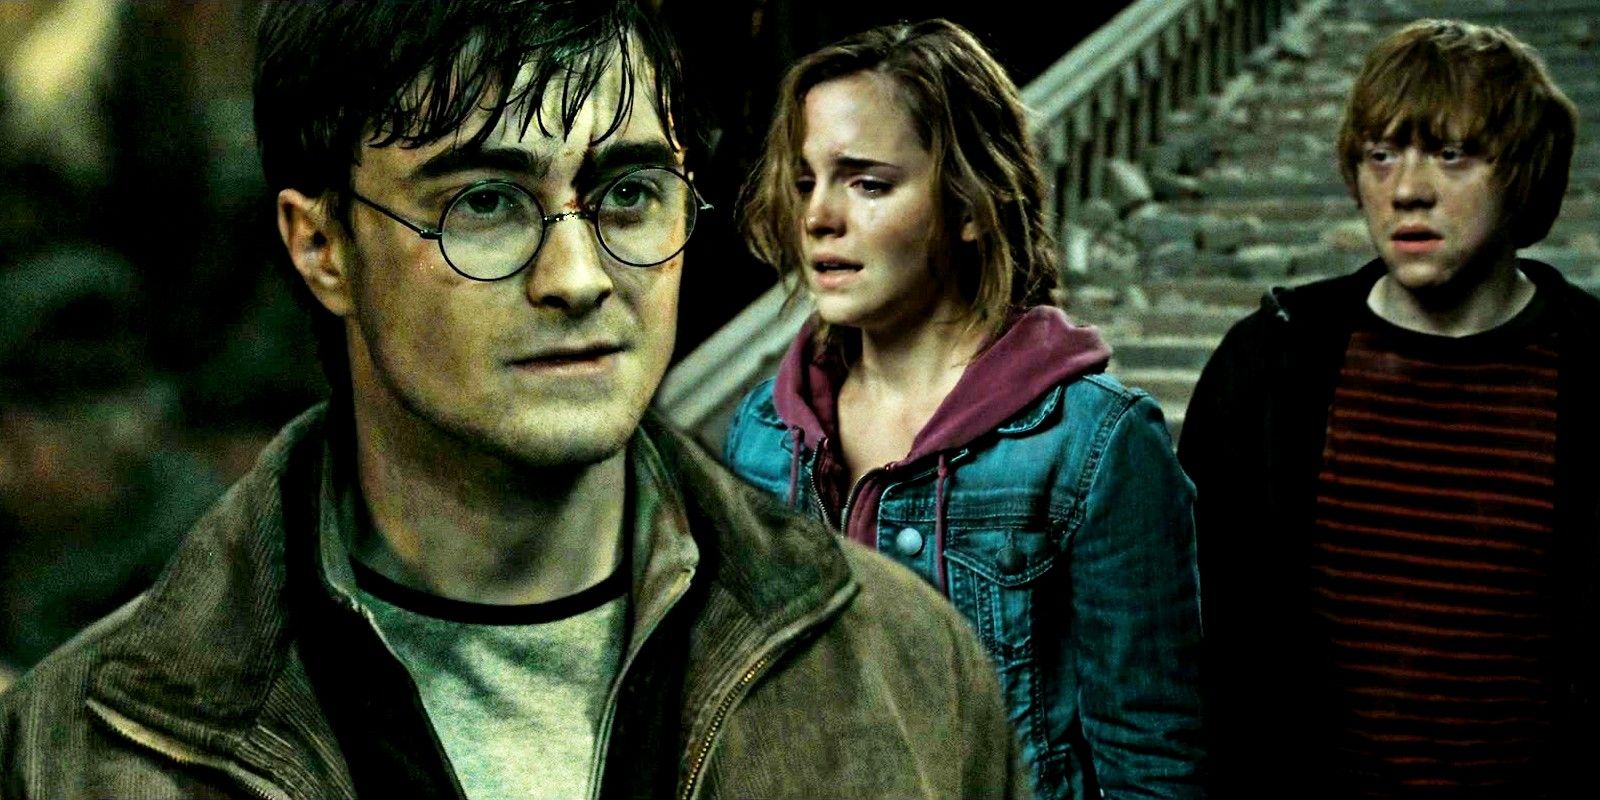 Blended image of Harry Potter contemplating while Hermione cries with Ron behind her in Harry Potter Deathly Hallows Part 2